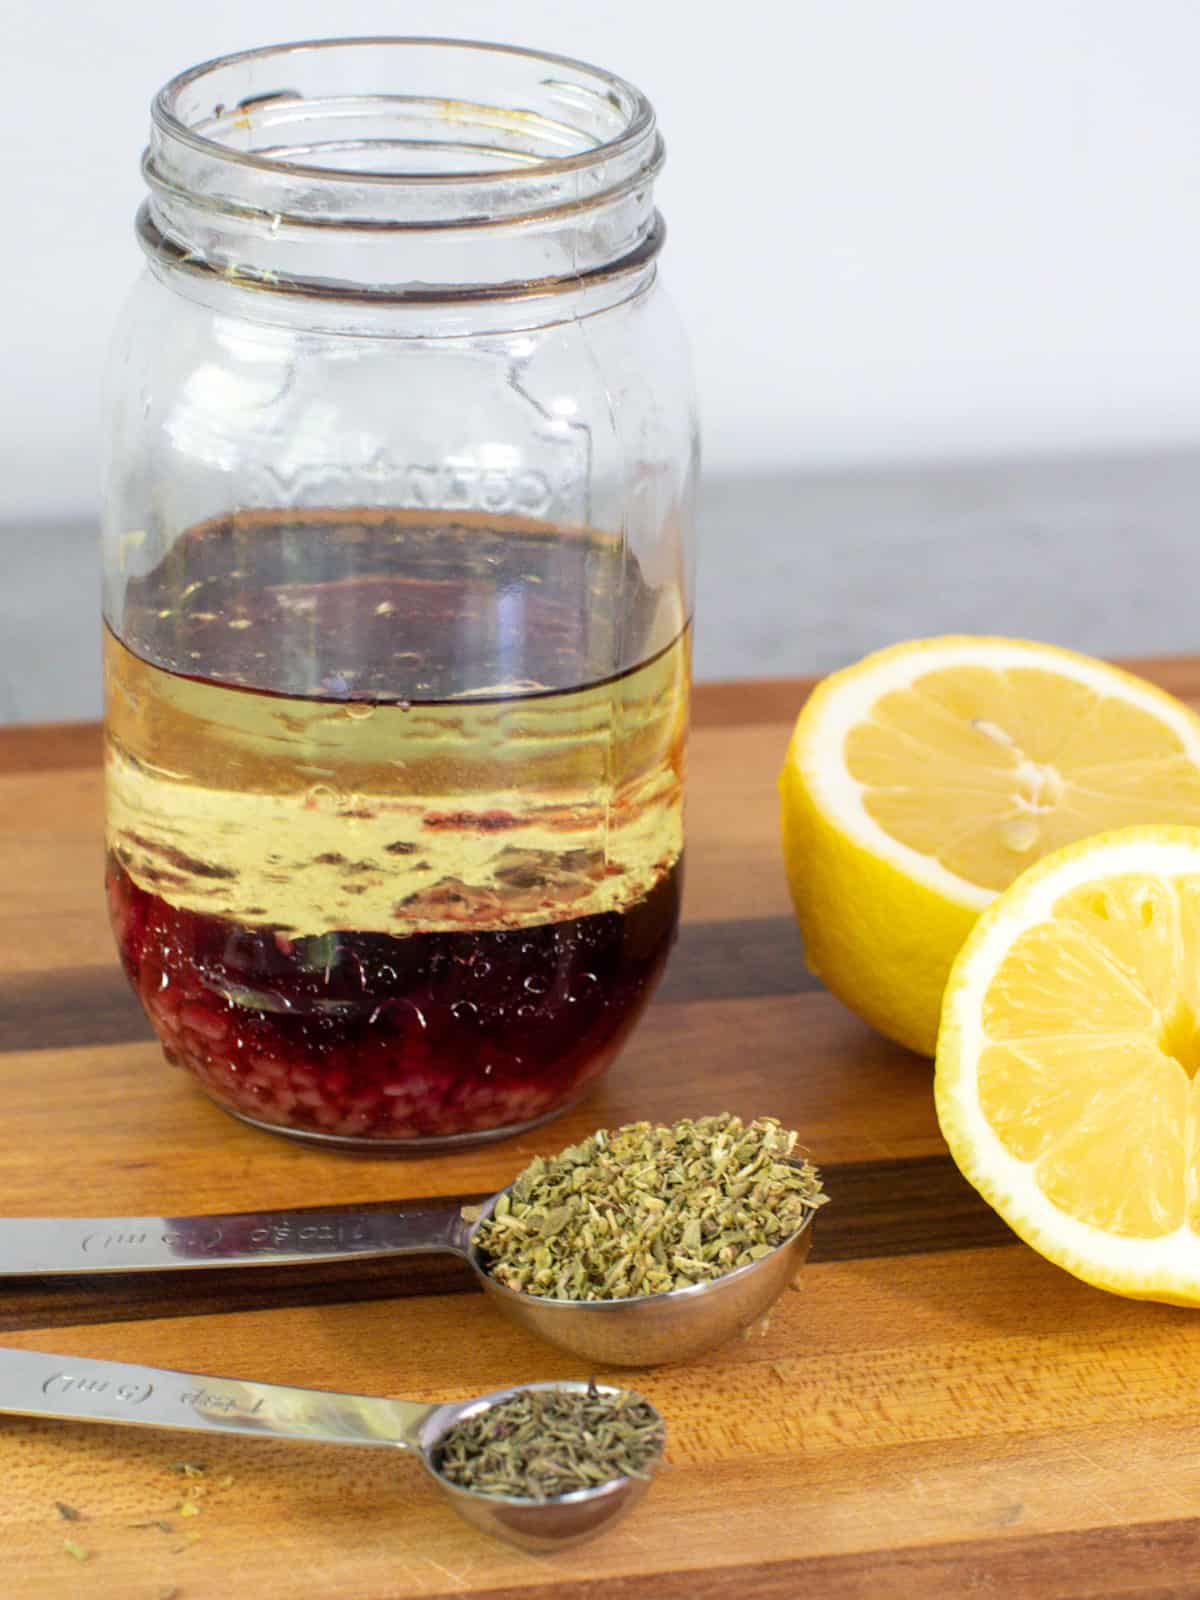 Oil and vinegar in a mason jar next to a sliced lemon and spoonfuls of oregano and thyme.